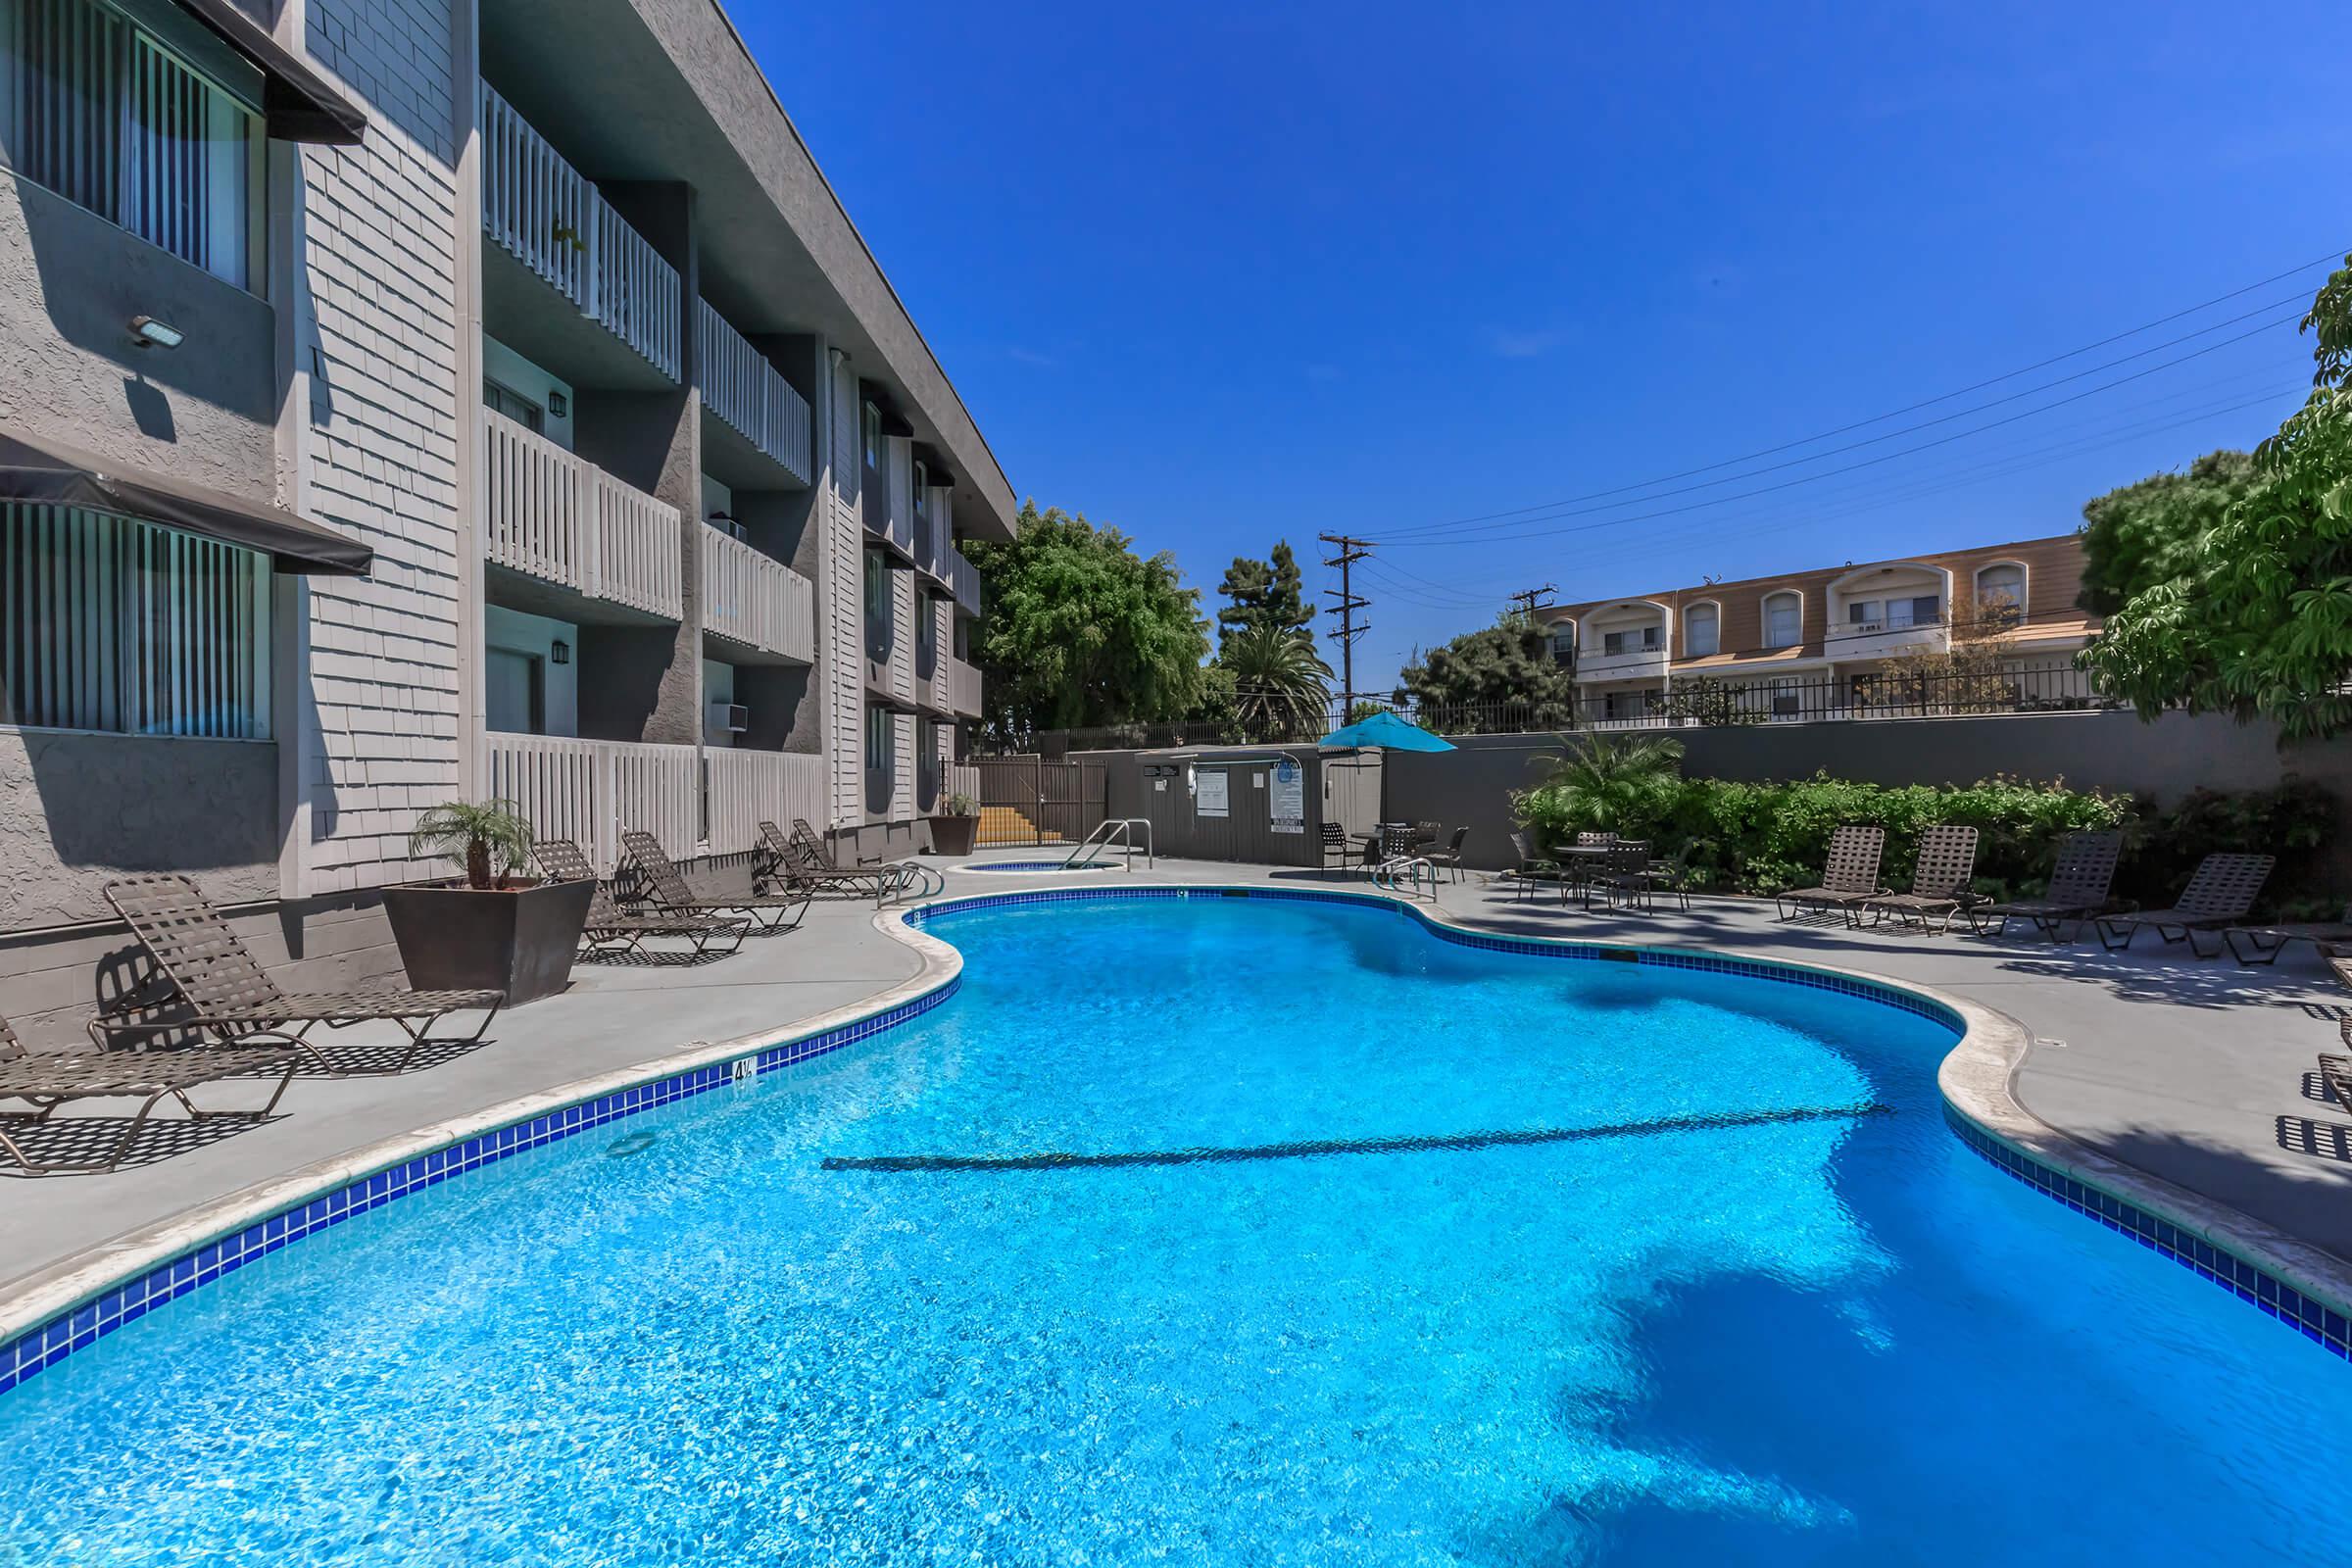 Pacific View Apartment Homes community pool